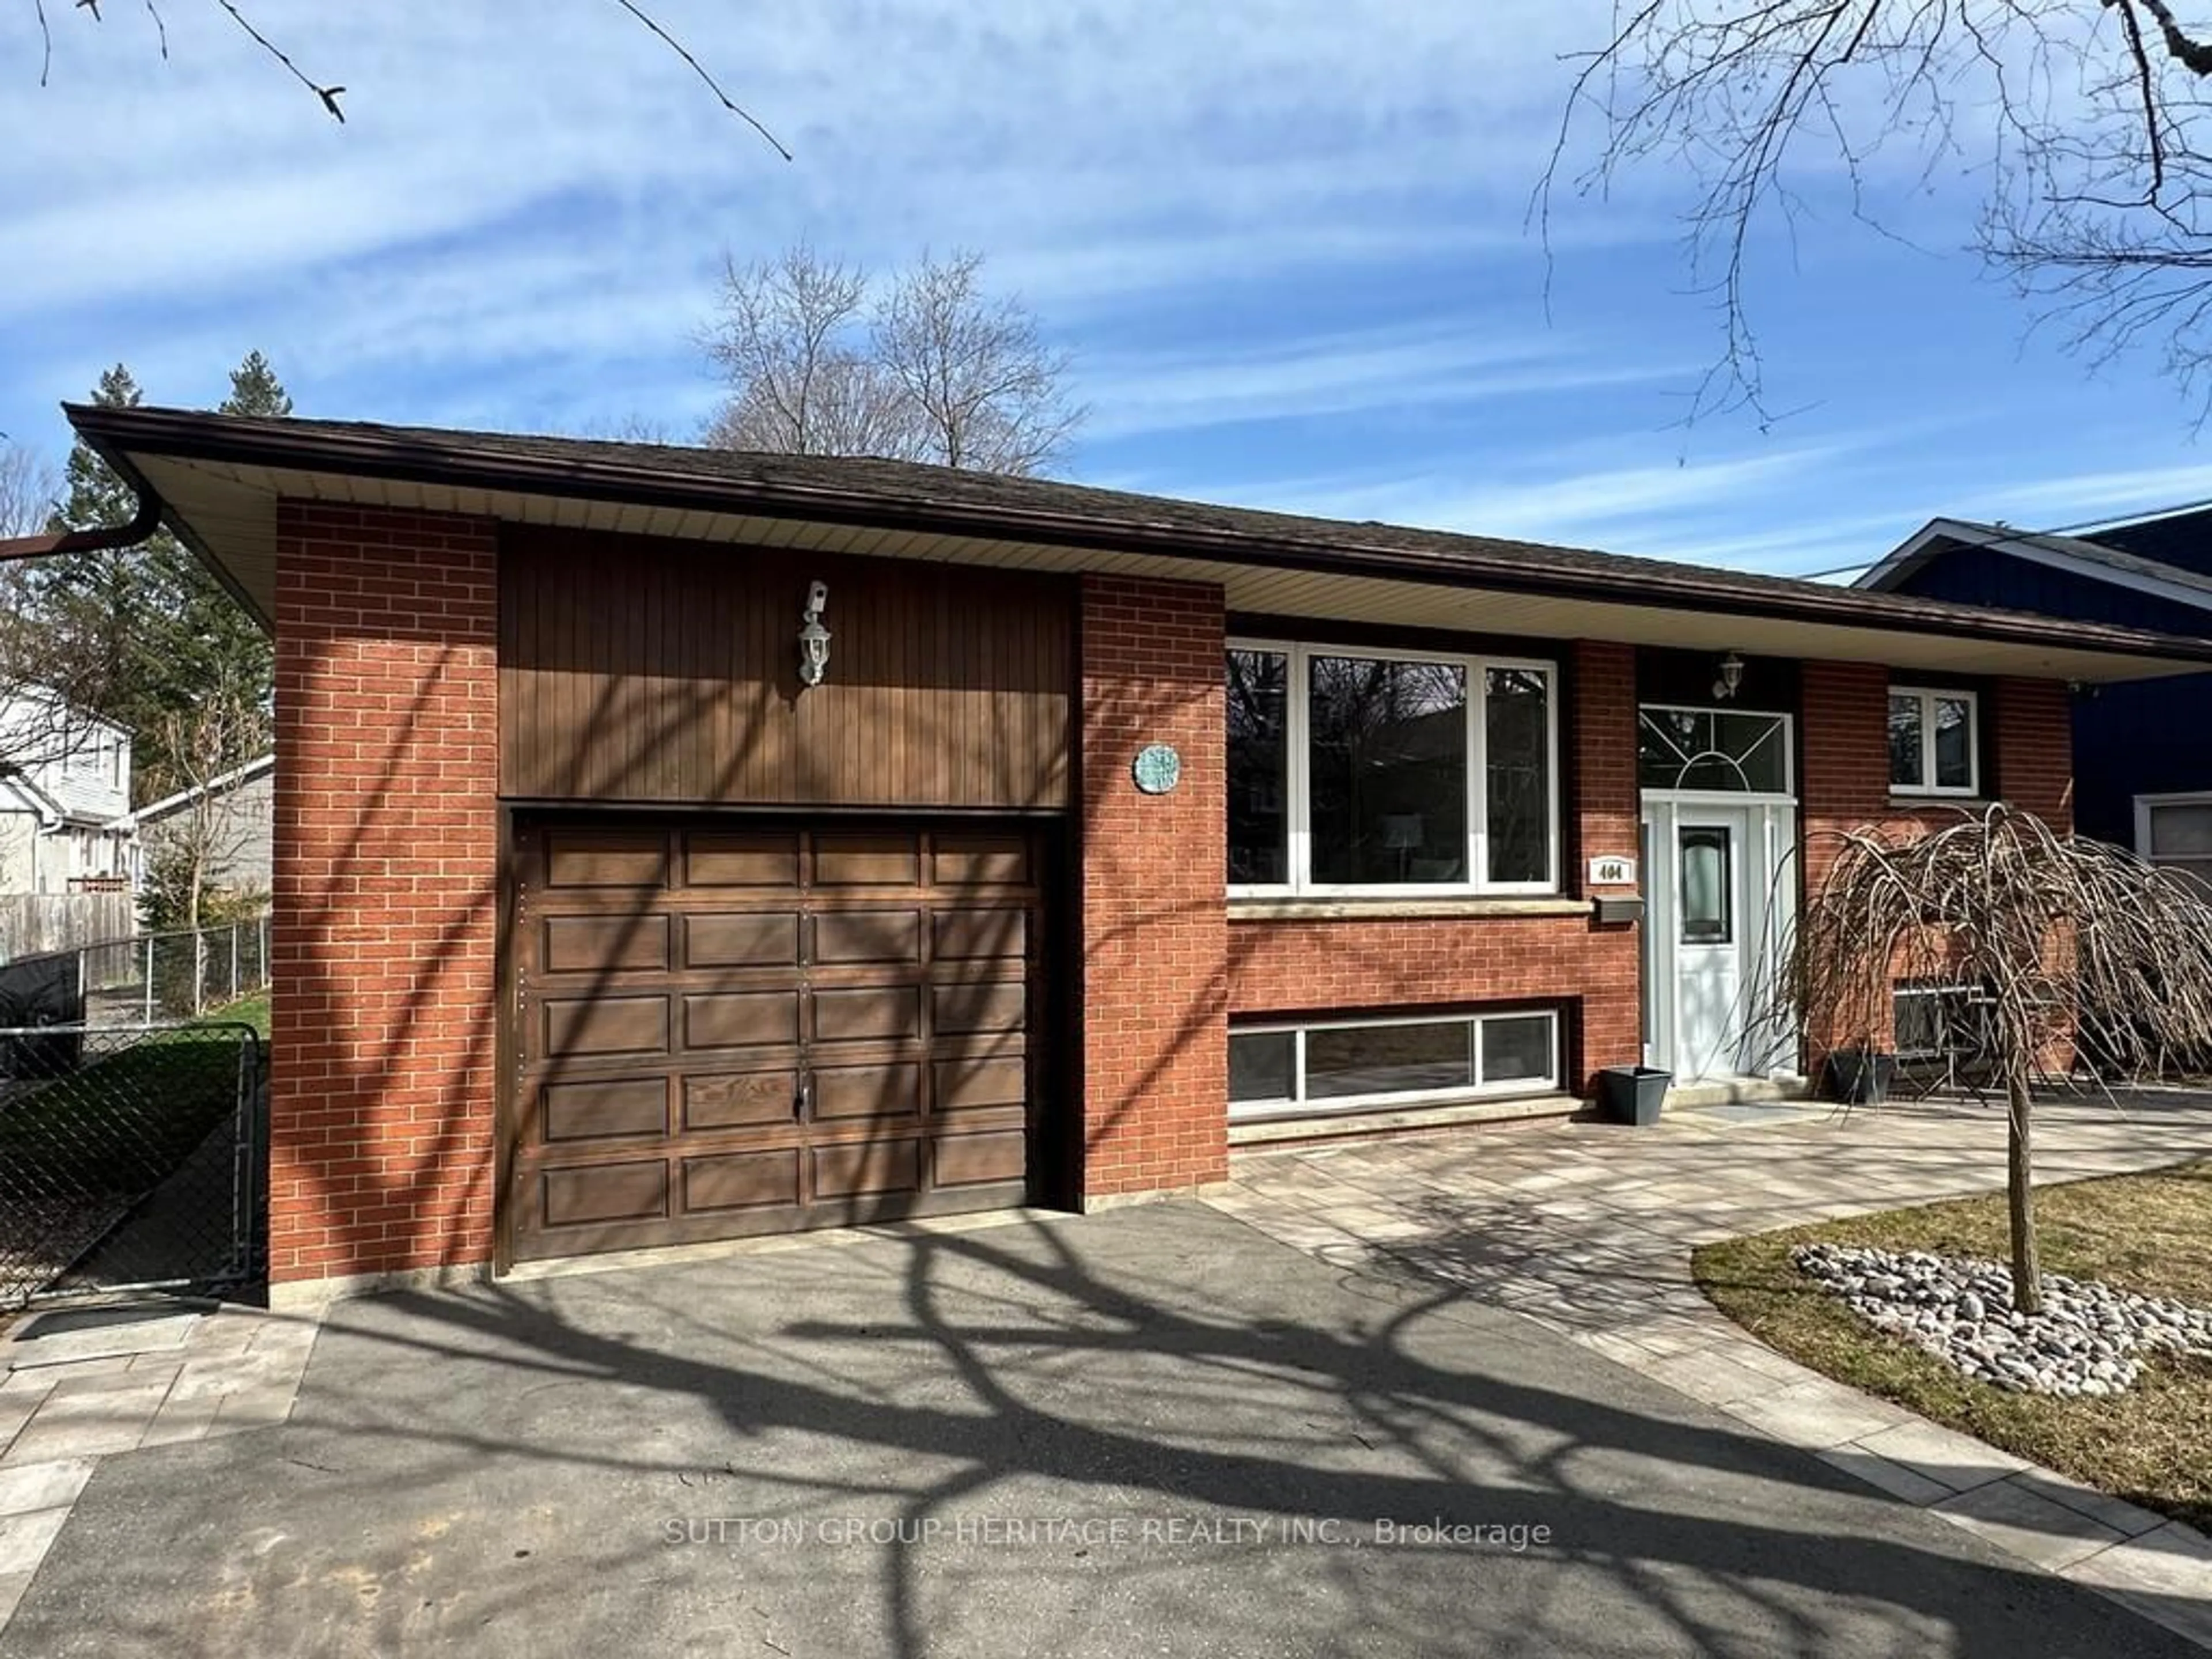 Home with brick exterior material for 404 Trent St, Whitby Ontario L1N 1M5